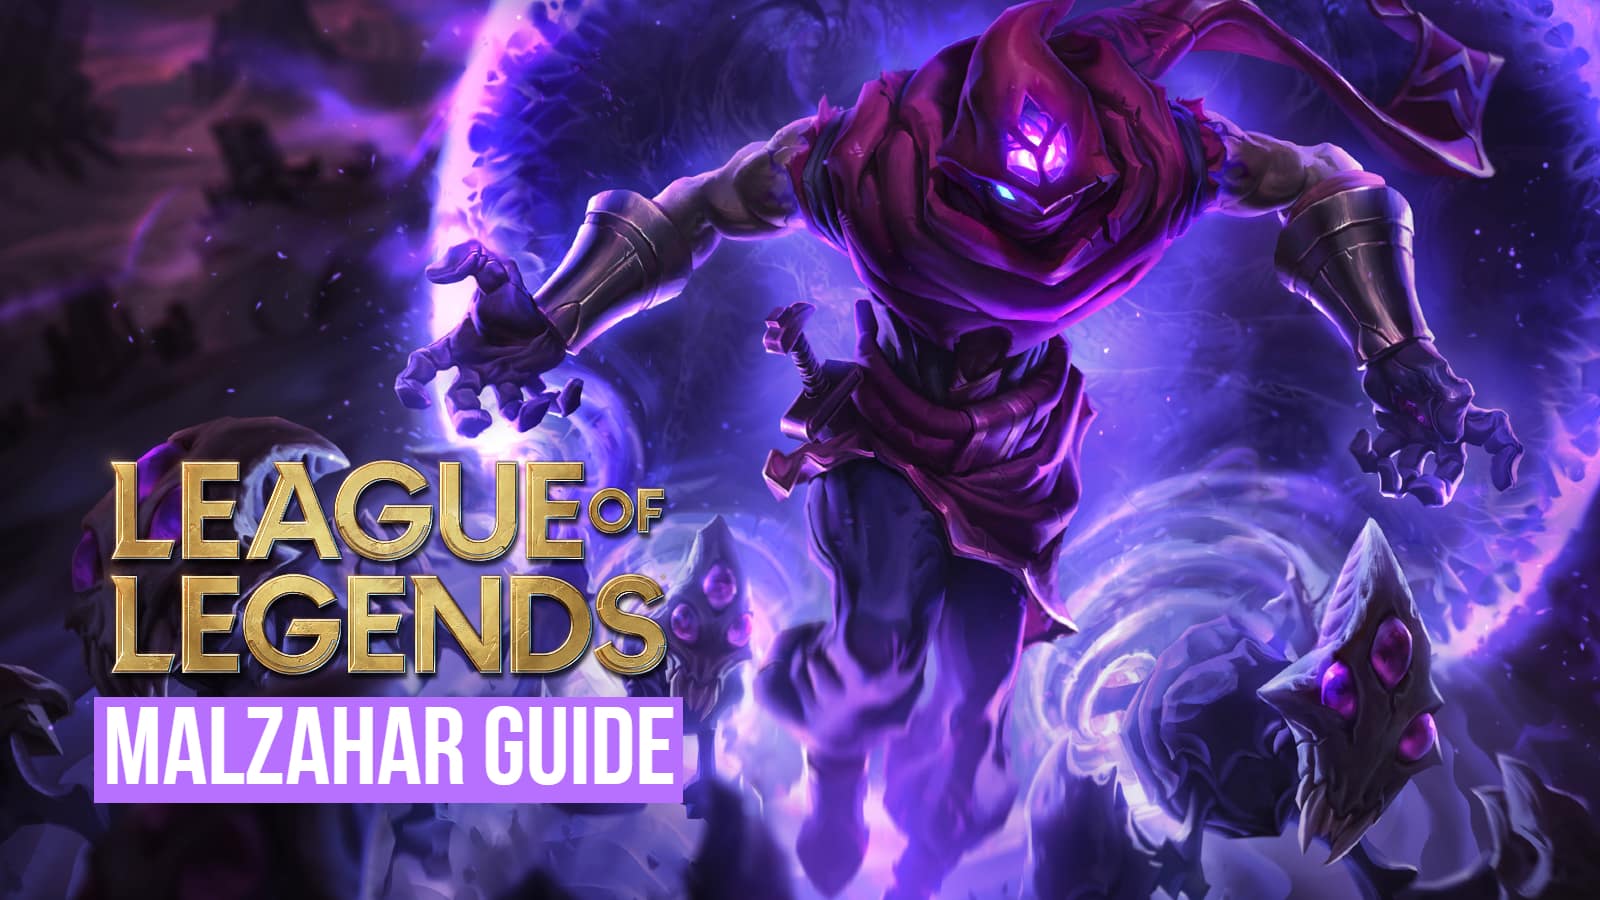 An In-Depth Ranked Guide for League of Legends: Everything You Need To Know